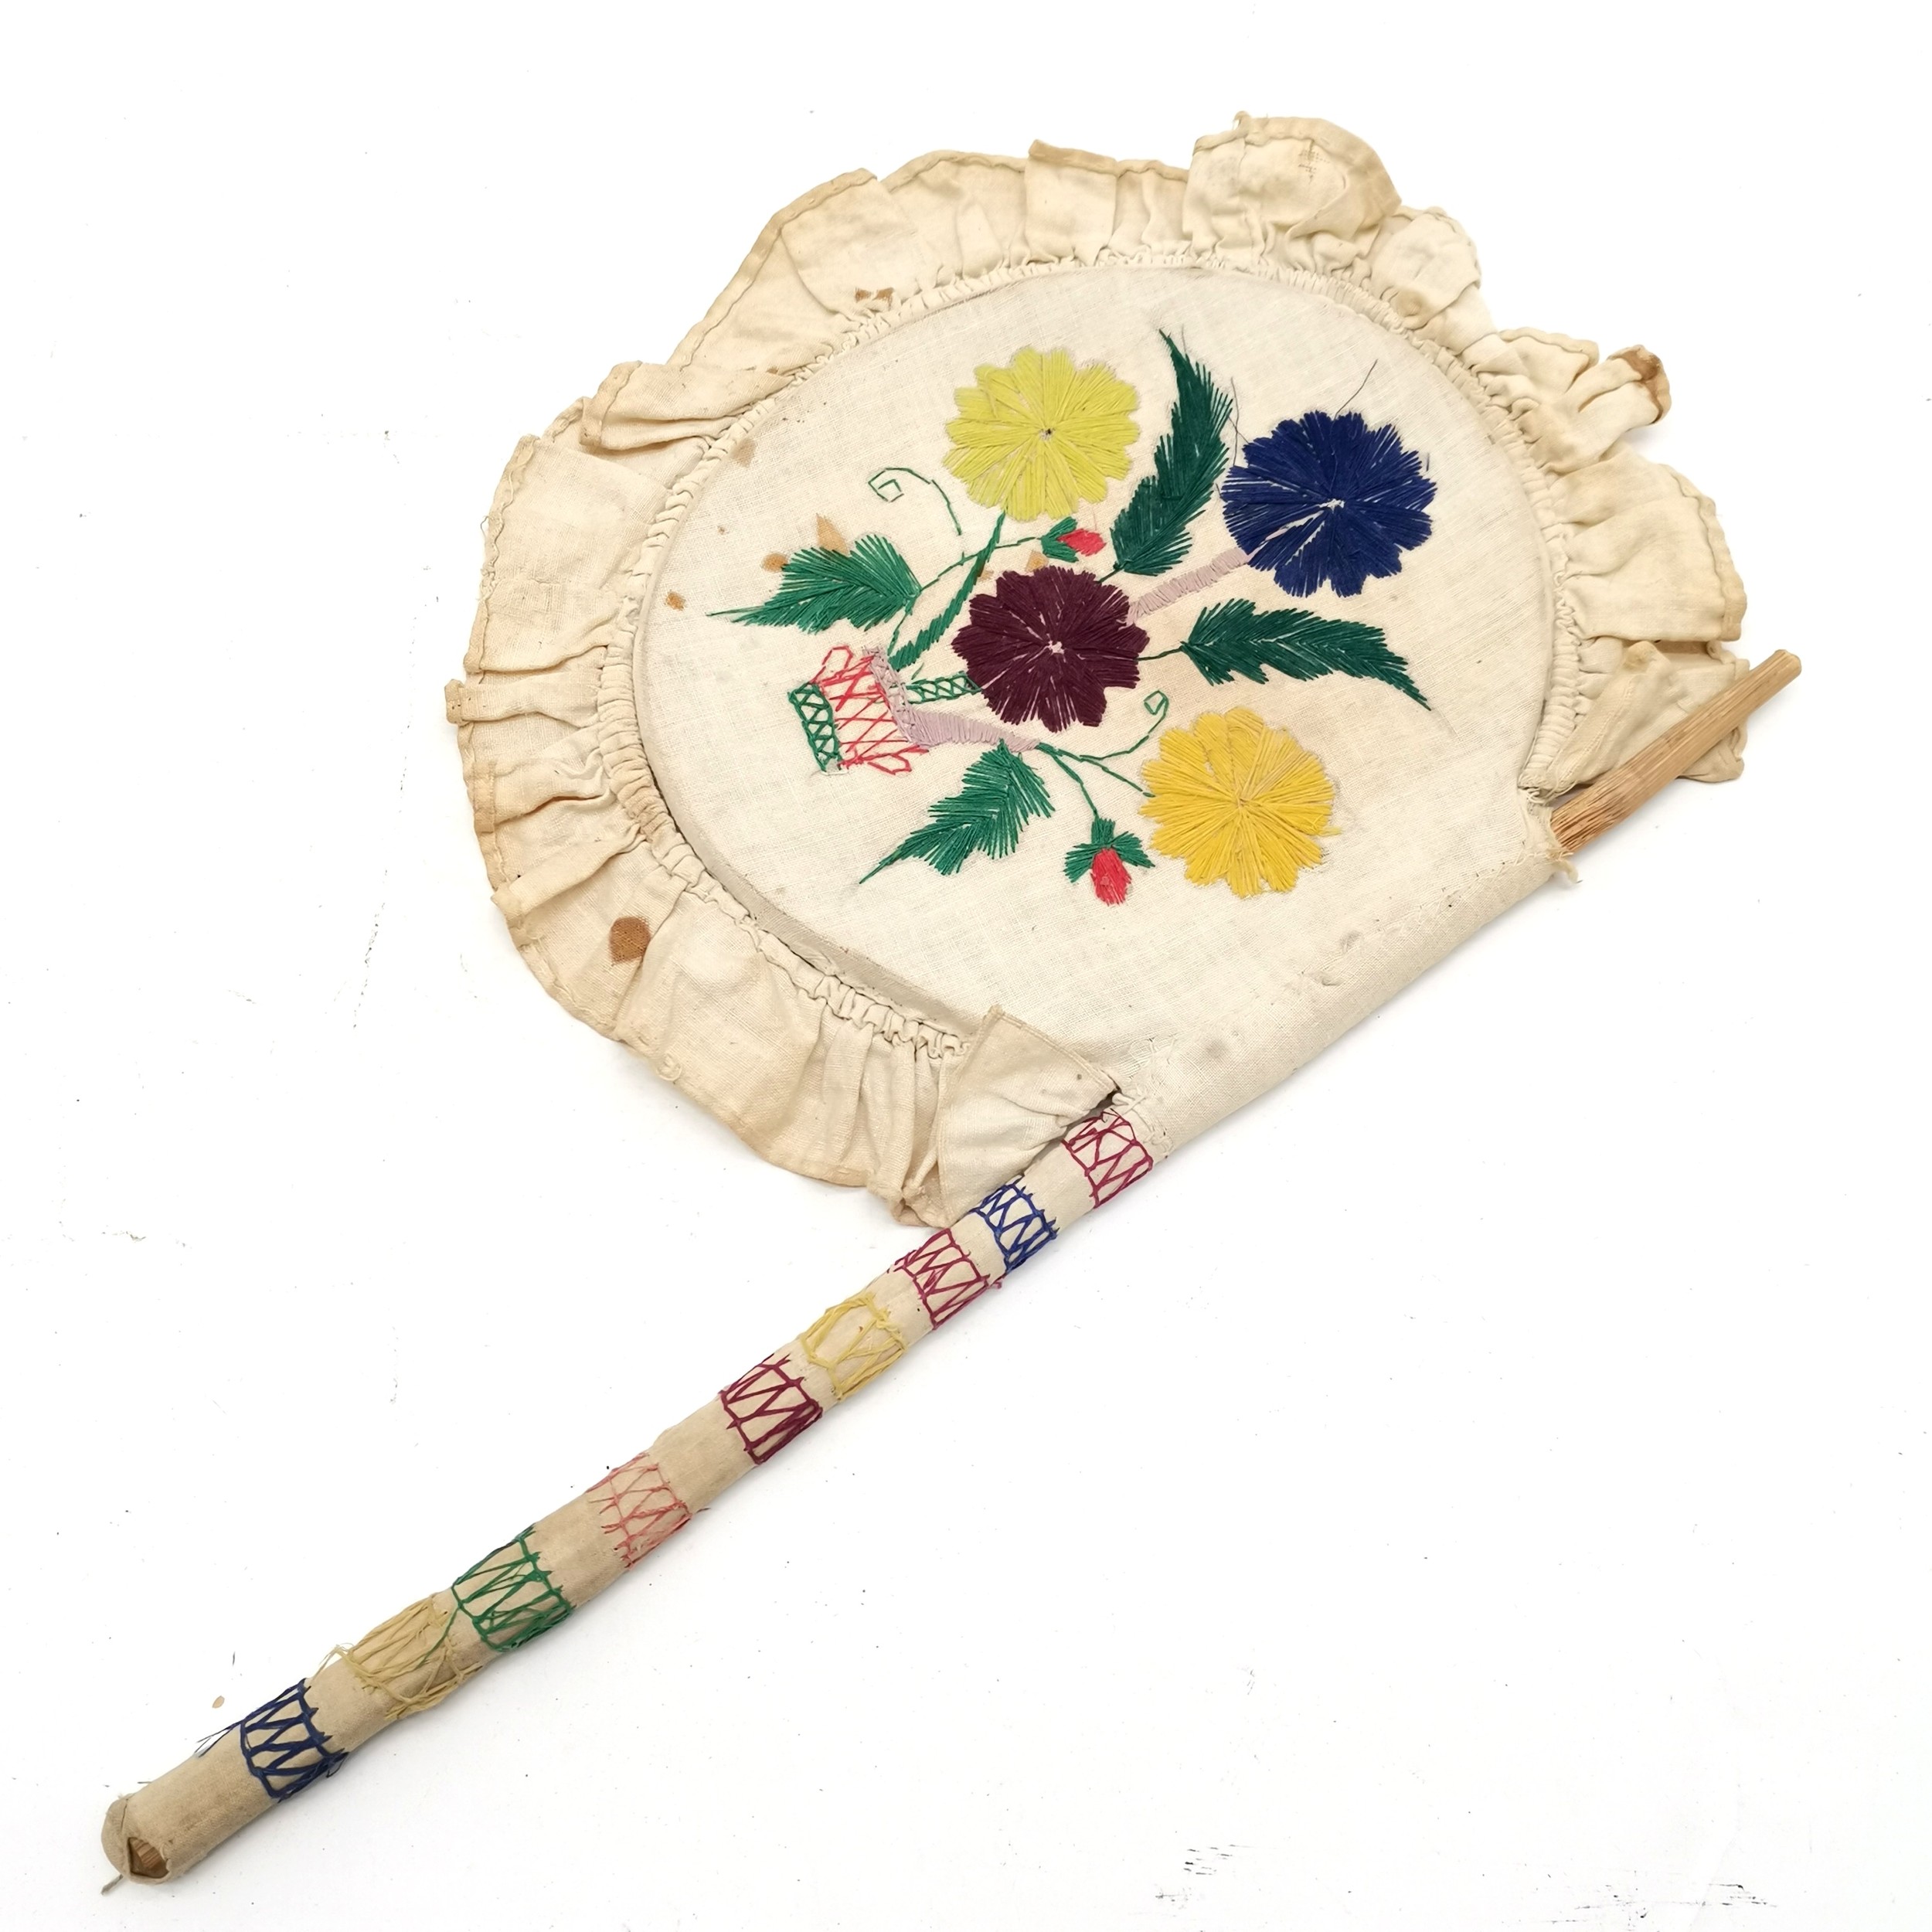 Hand embroidered Indian made fan on wooden shaft - 45cm long & has obvious wear & marks - Image 2 of 3